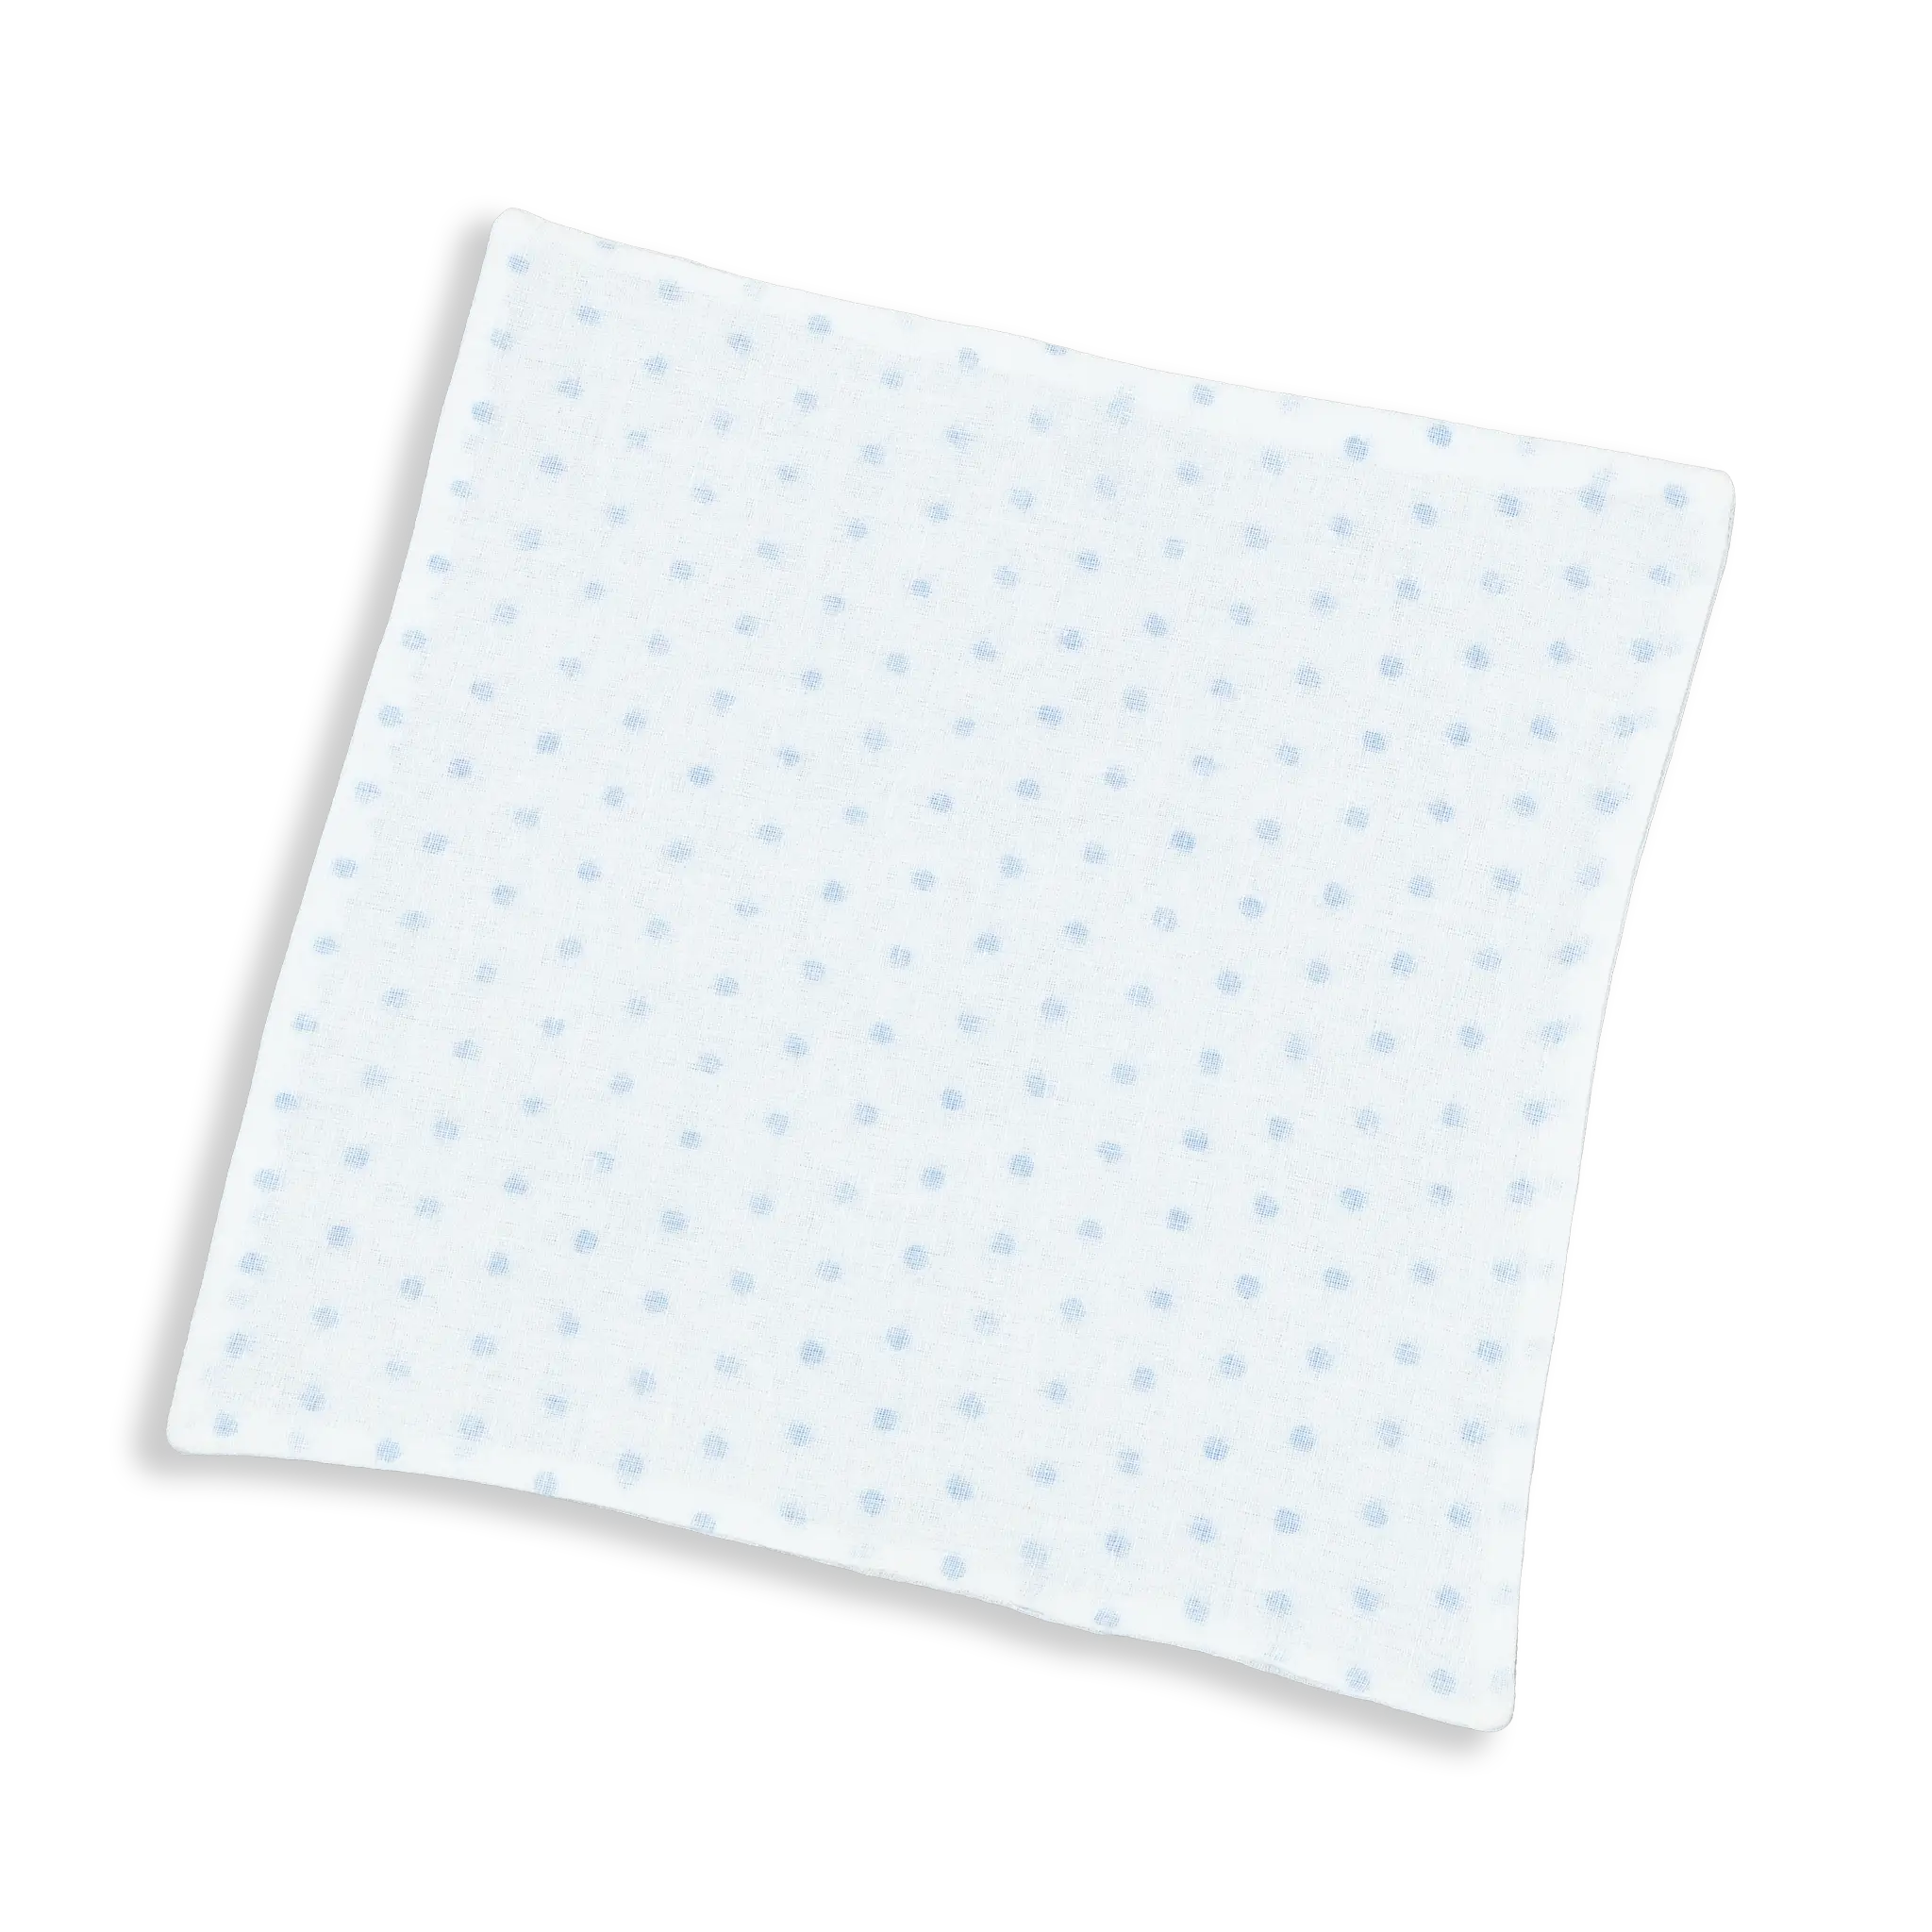 A Handkerchief is essential for newborns to keep tidy. This super-soft handkerchief is made with 3 layers of the finest muslin cotton fabric.